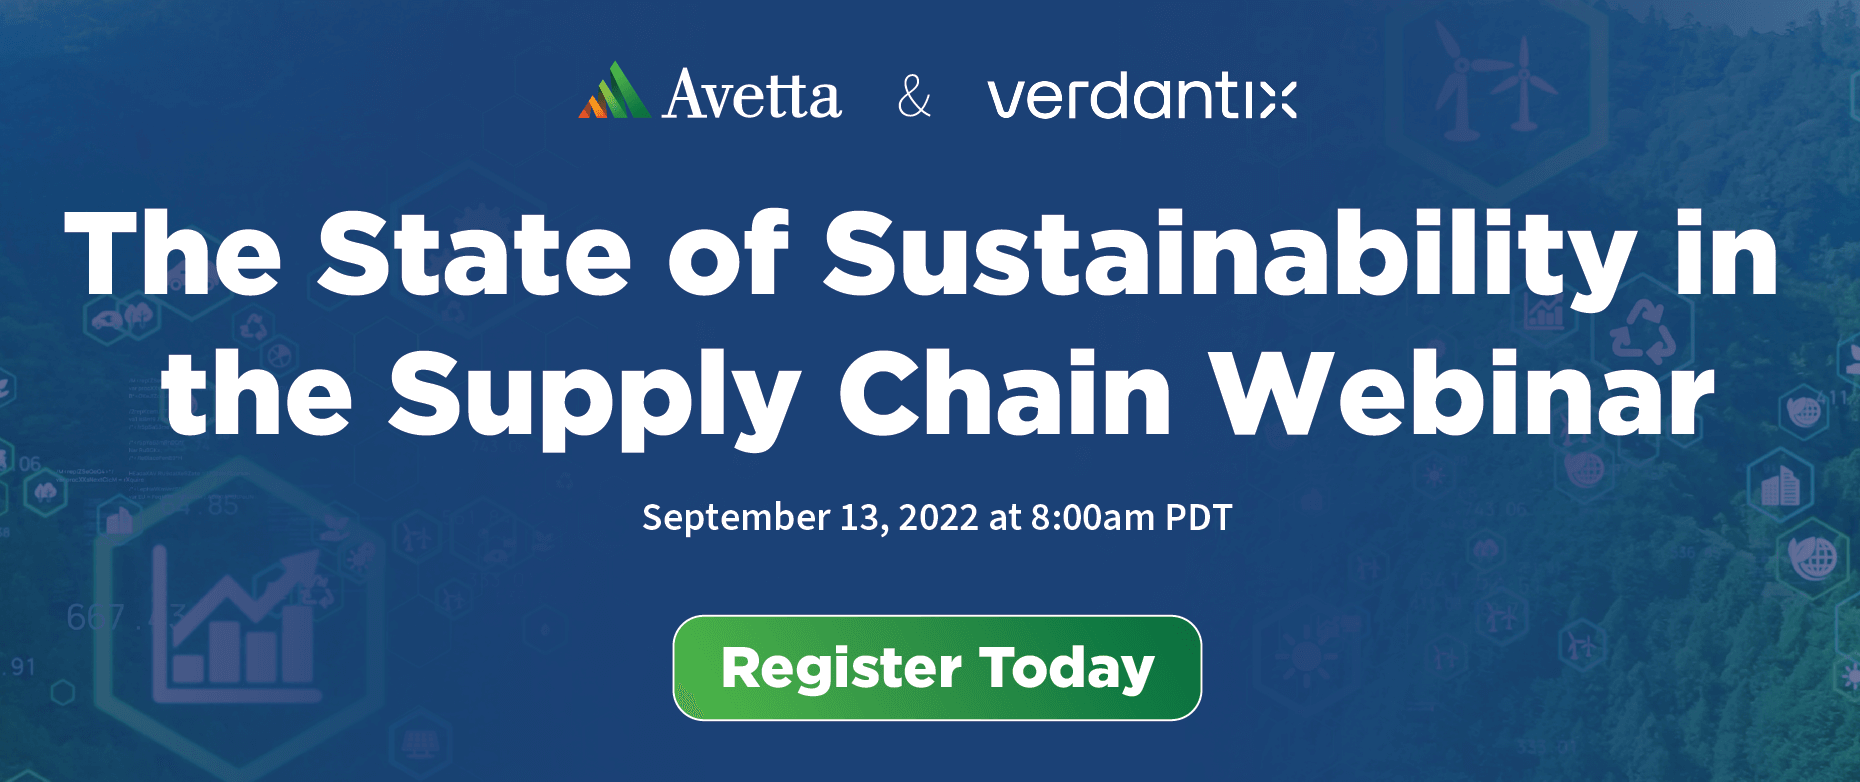 The State of Sustainability in the Supply Chain